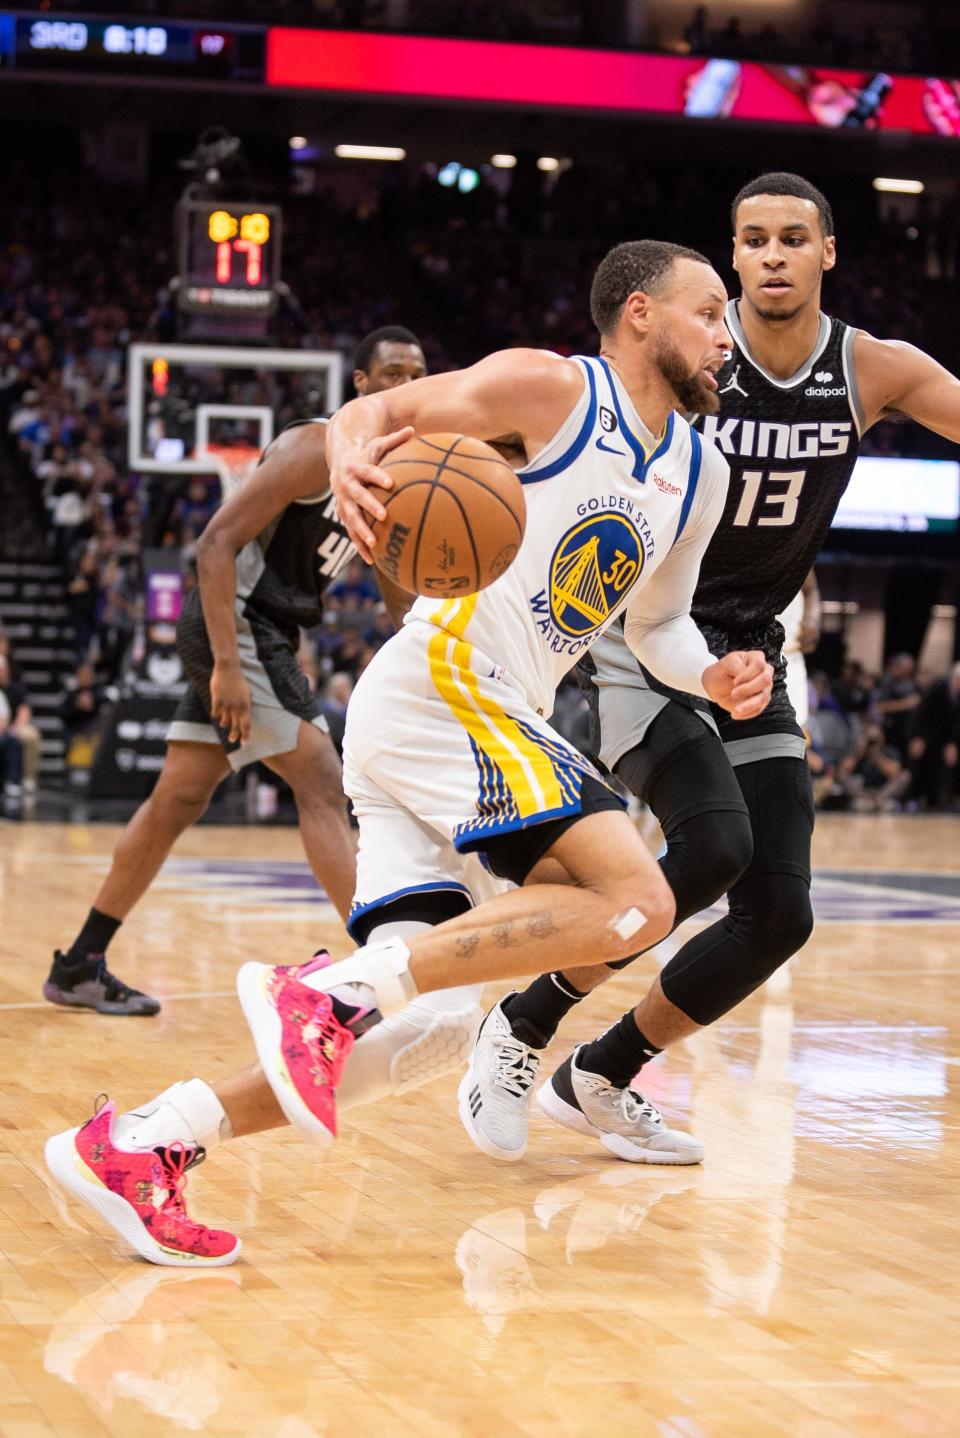 The Steve Curry Warriors - who have won four NBA Finals since 2015 - take on the Sacramento Kings - who are in their first playoff game since 2006 - in the first round.